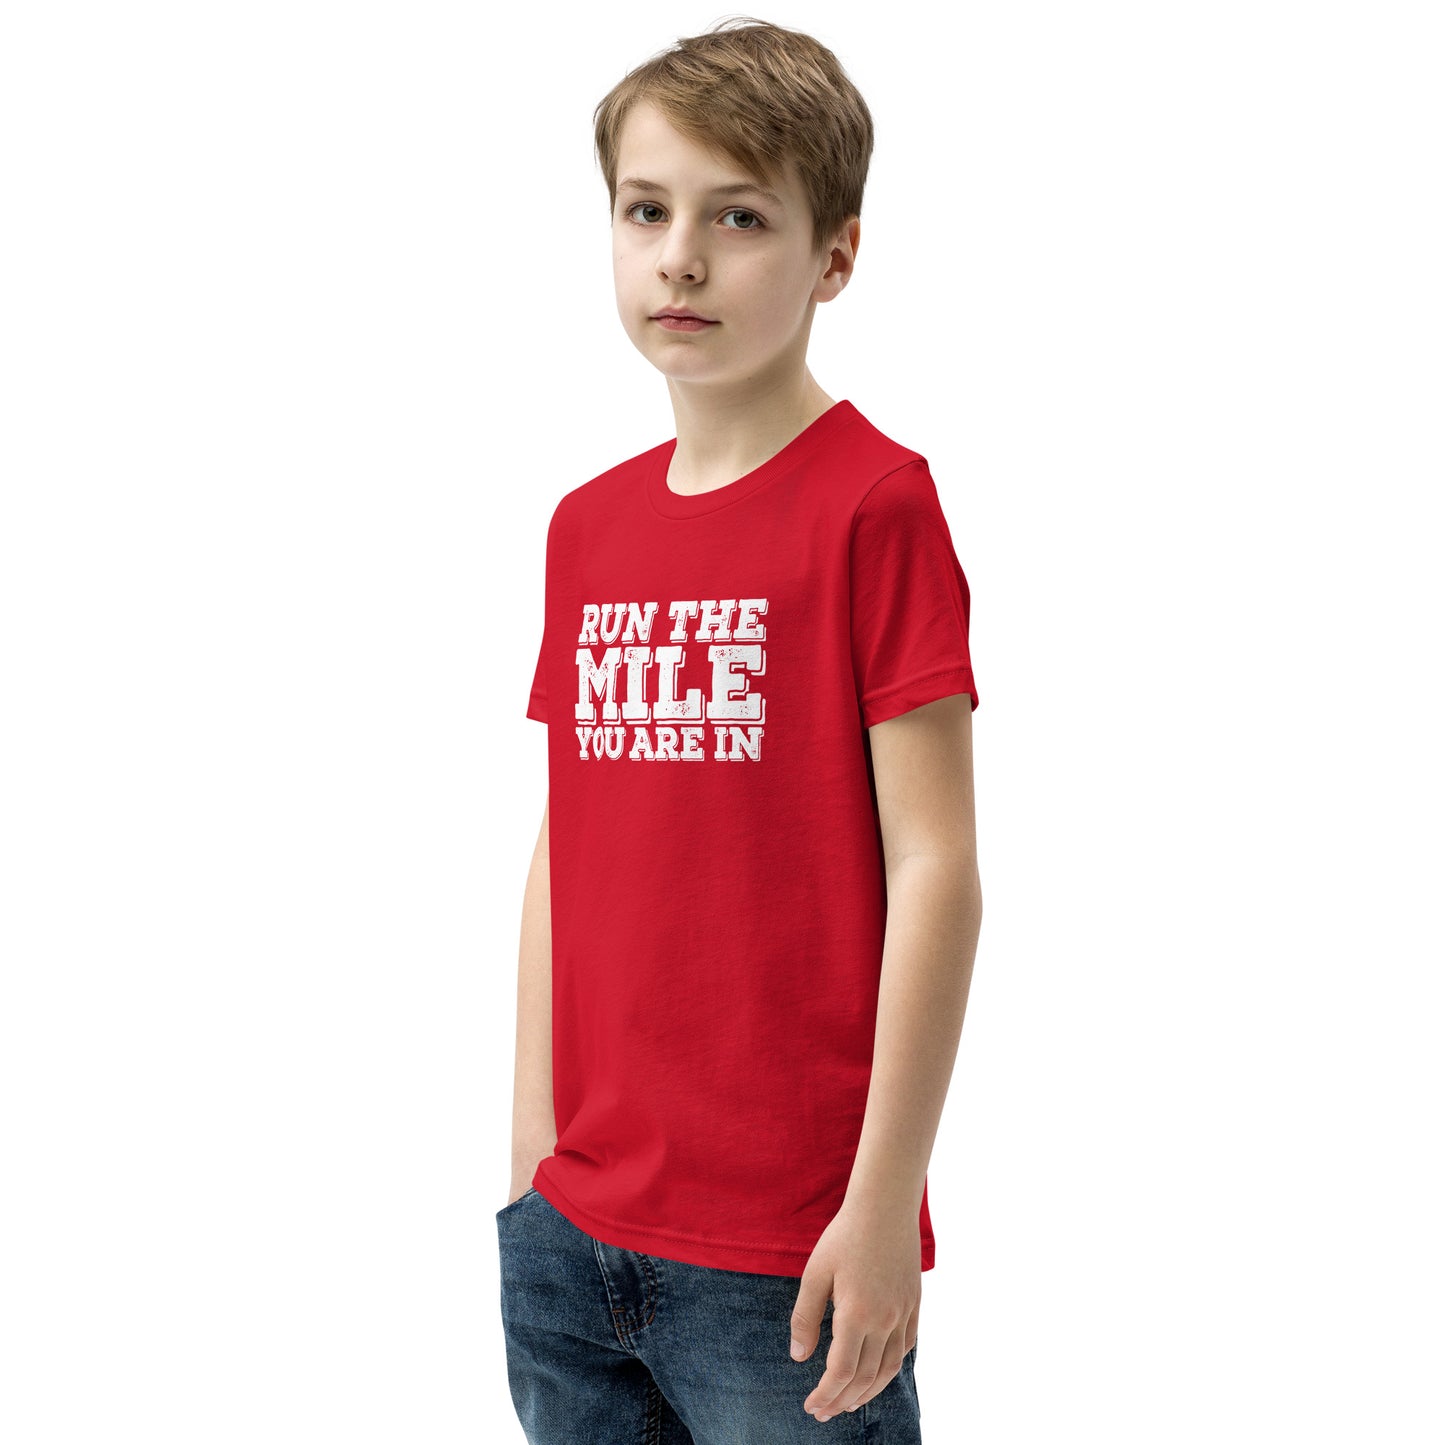 Run the Mile you are in Youth Short Sleeve T-Shirt